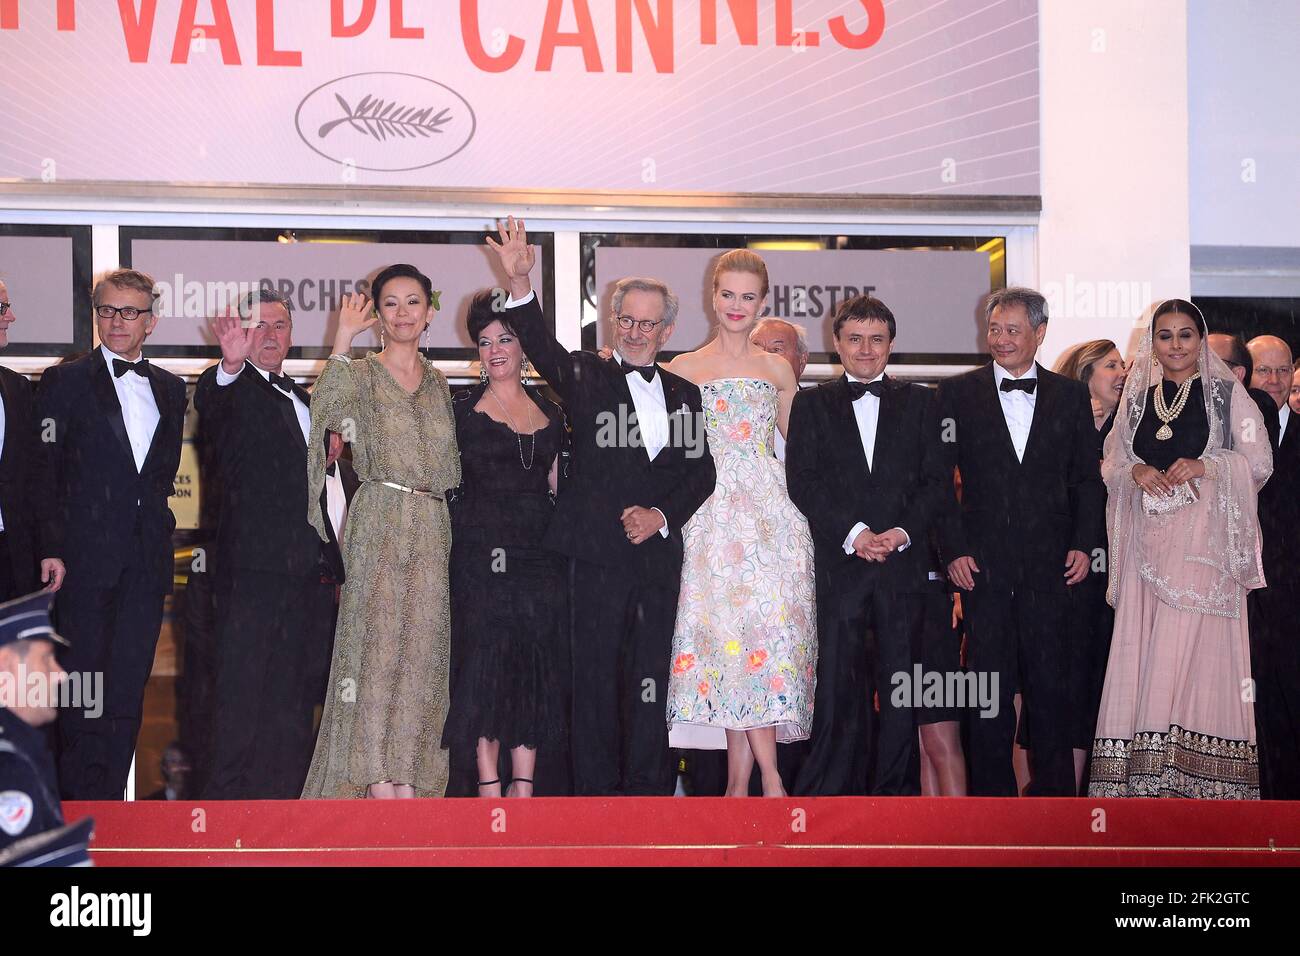 Cannes, France. 15 May 2013 Opening ceremony and premiere film The Great Gatsby during 66th Cannes Film Festival Stock Photo